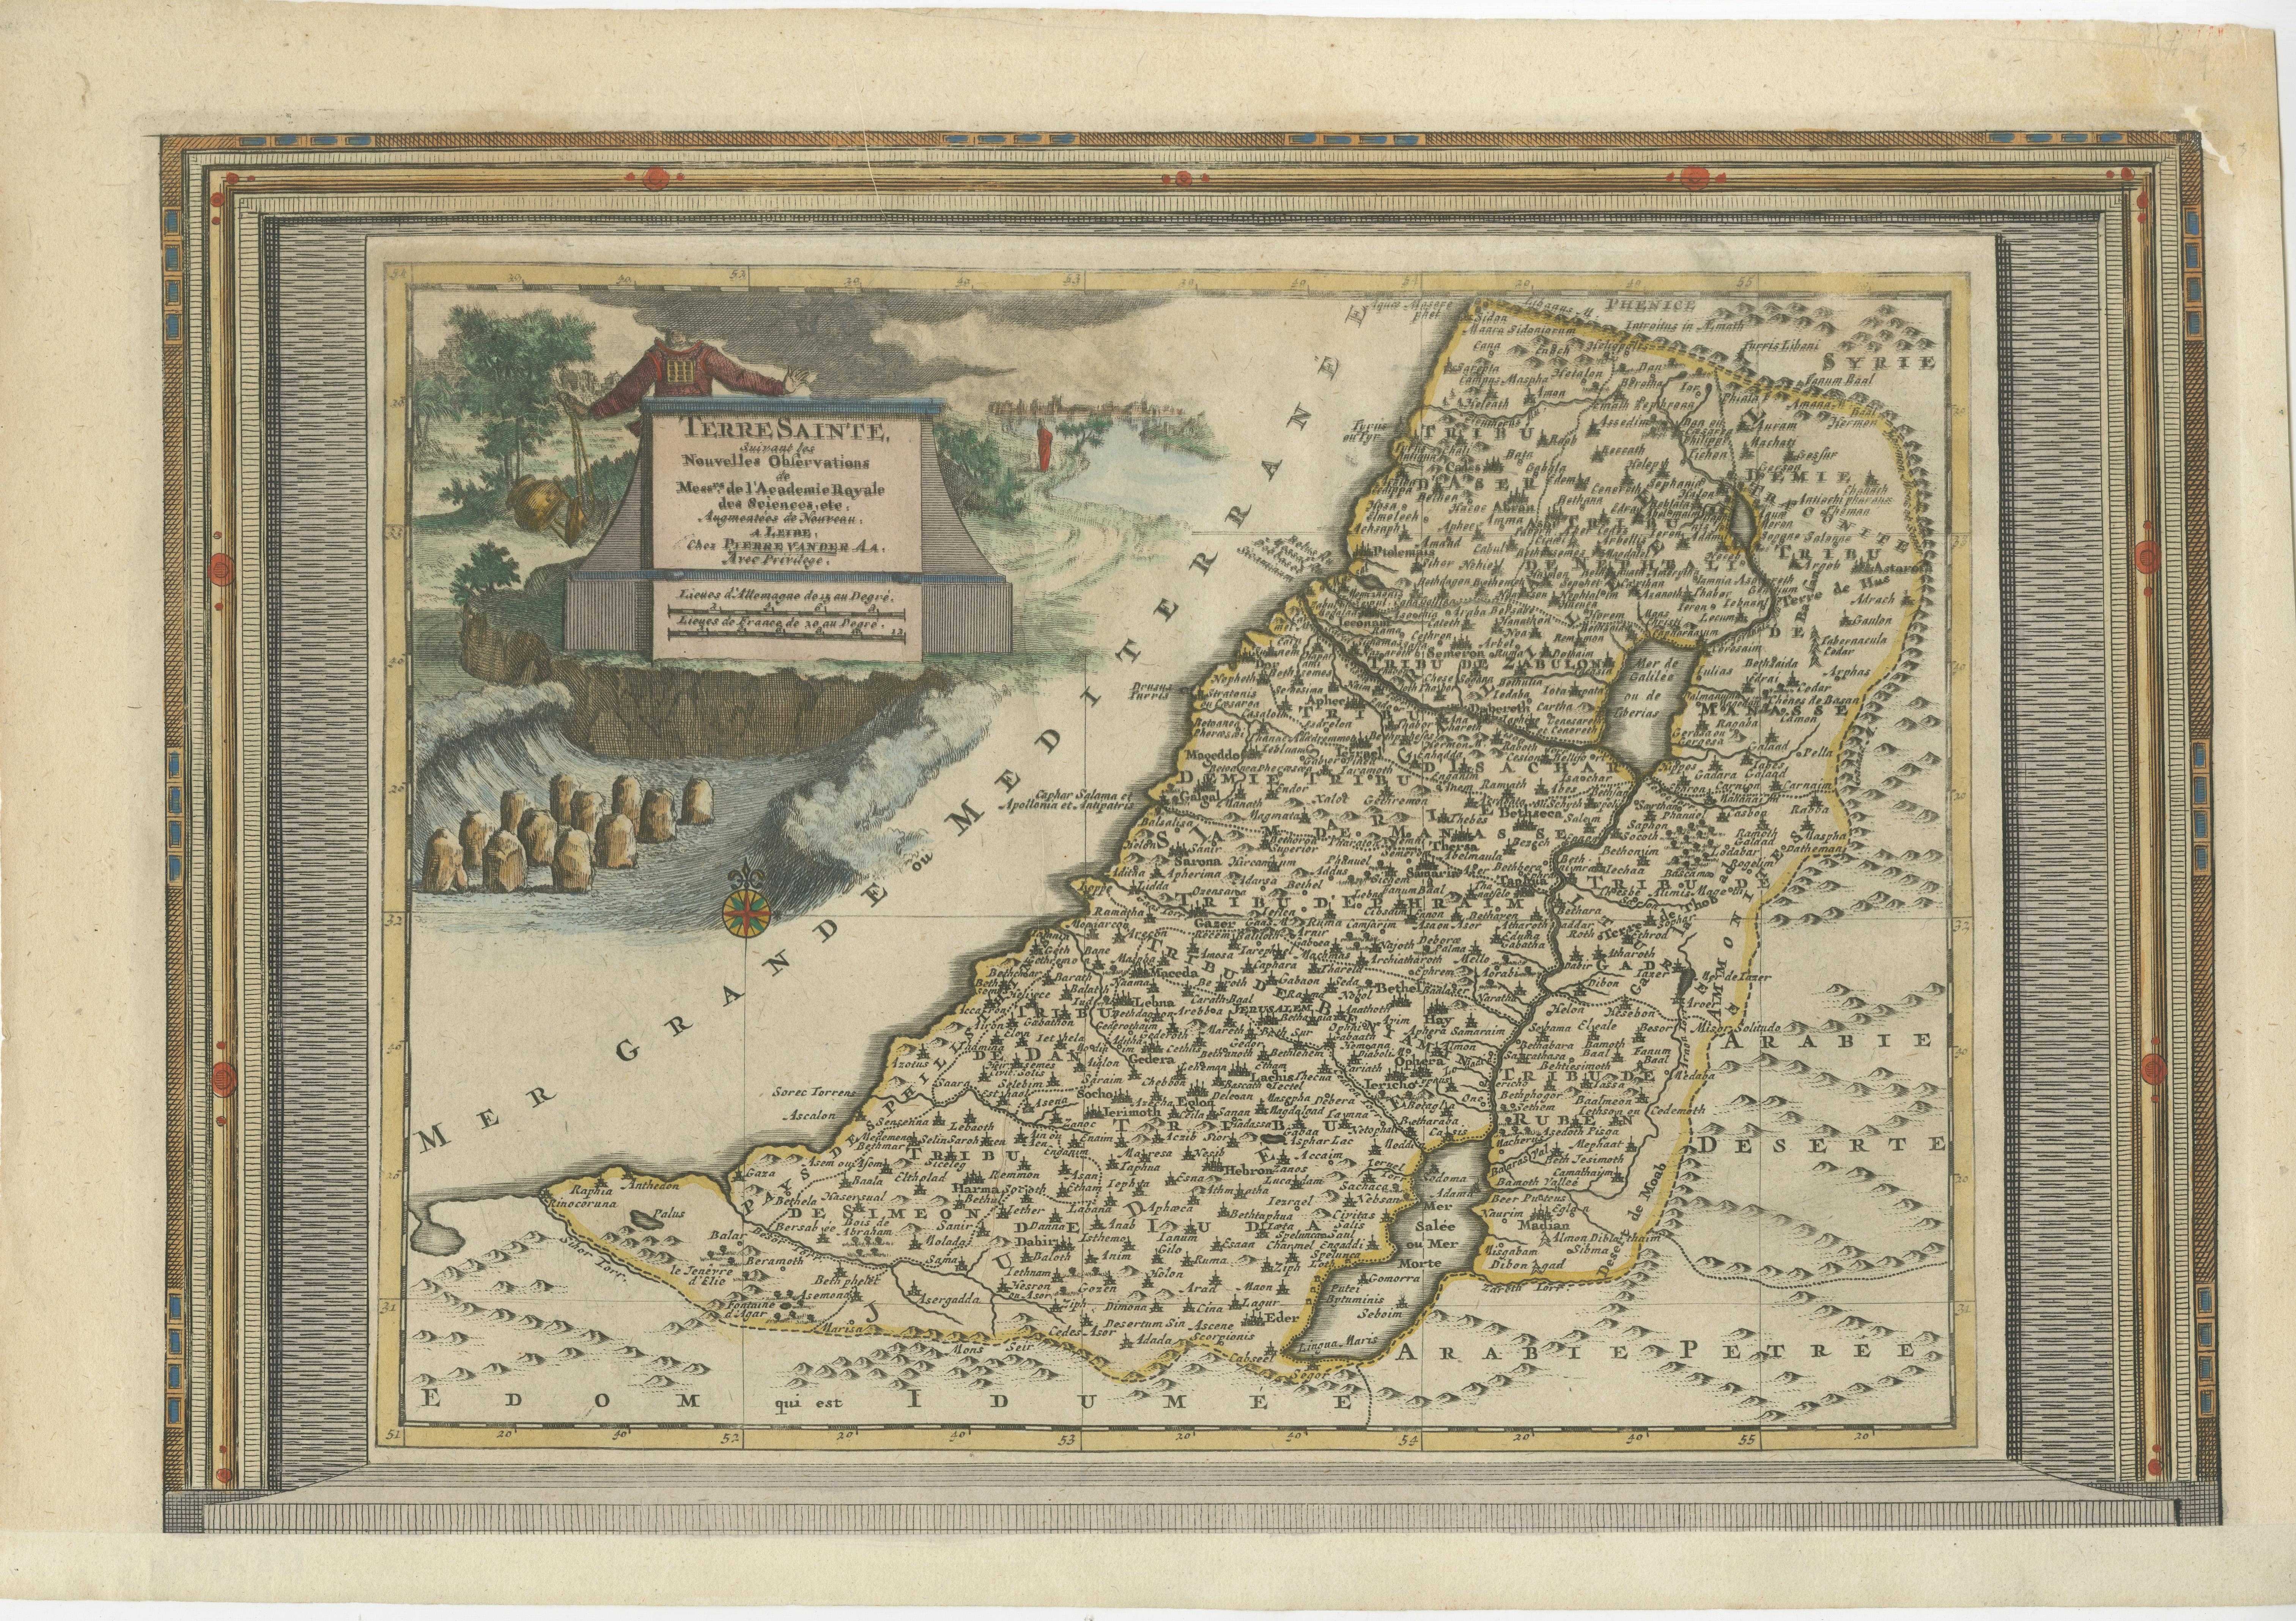 Antique map titled 'Terre Sainte Suivant les Nouvelles Observations (..)'. Original old map of the Holy Land with the picture frame border. The term 